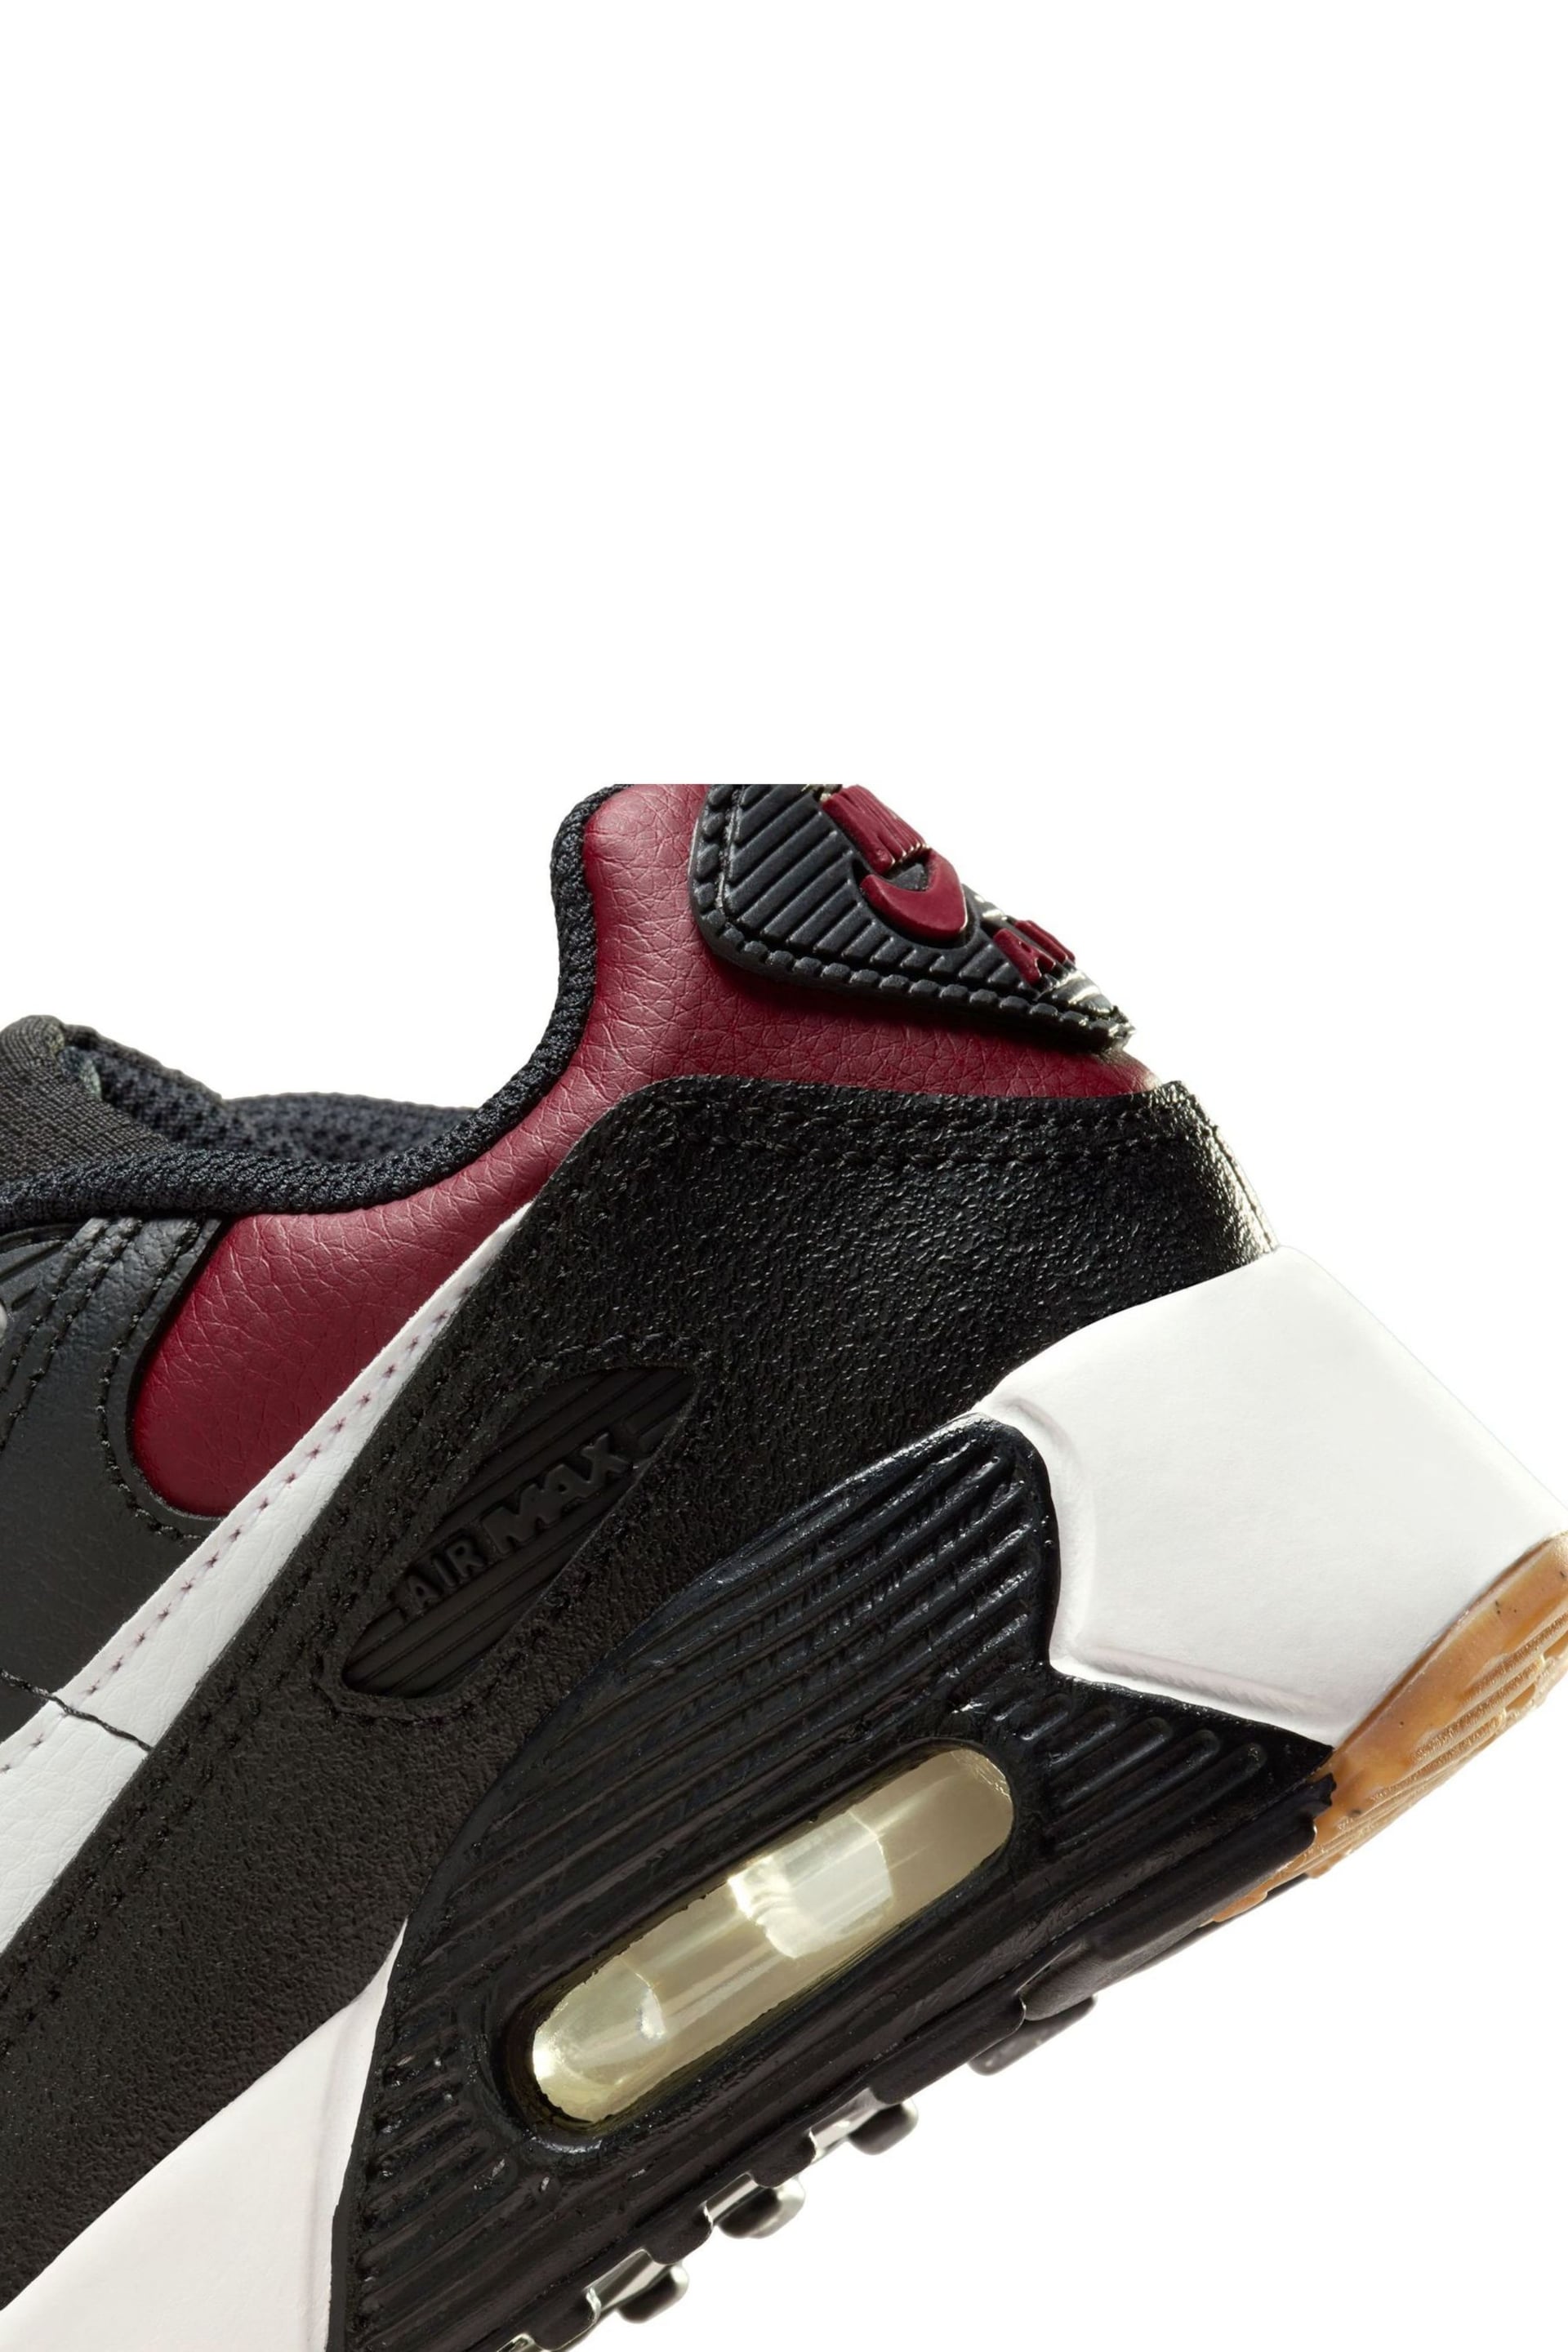 Nike Black/White/Red Air Max 90 Junior Trainers - Image 8 of 8